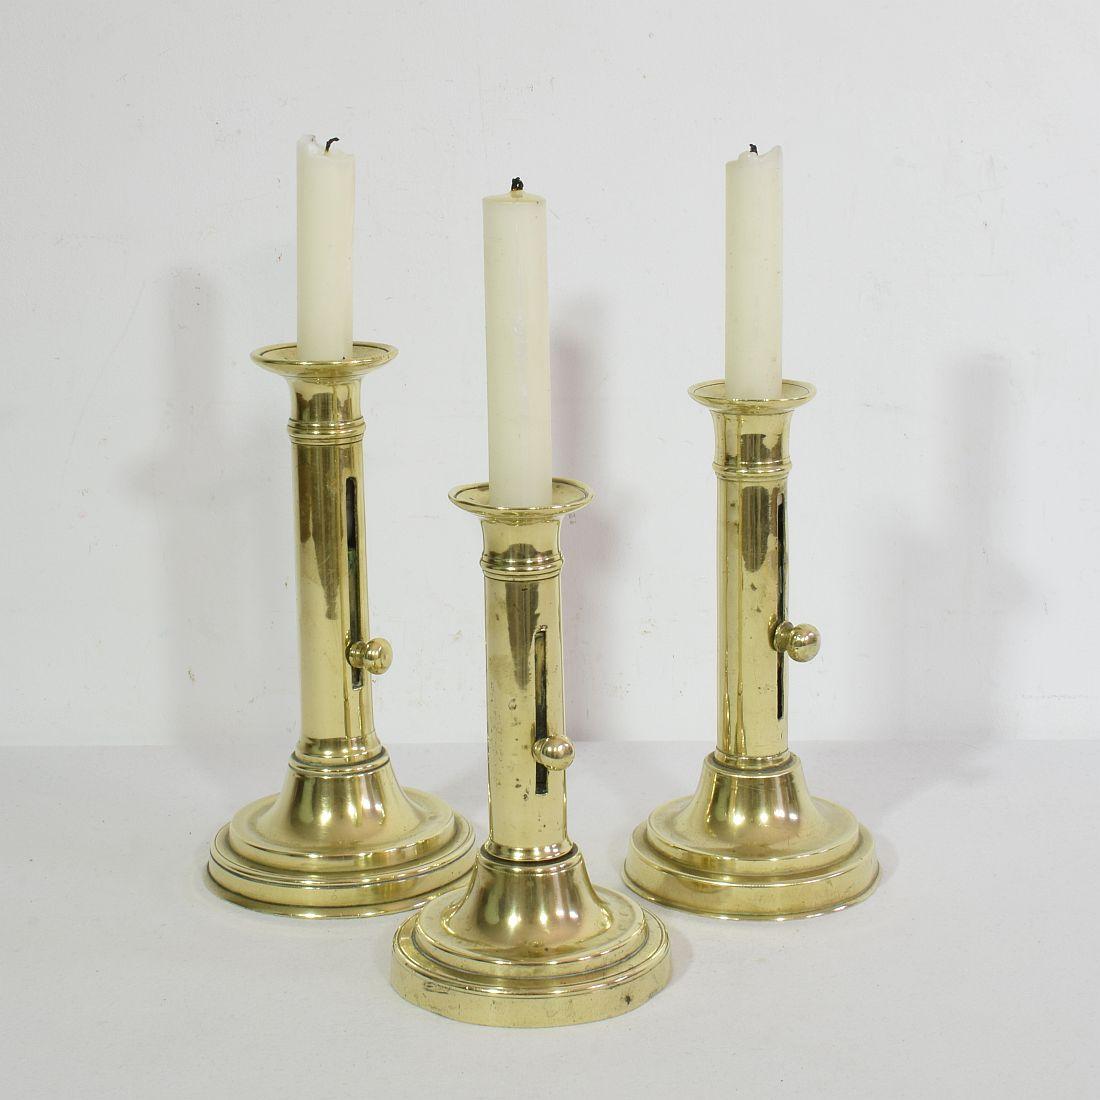 Wonderful collection of 3 brass push up bistro candleholders.
France circa 1850-1900
Measurements: H:17-20cm W:9,5-10,5cm.